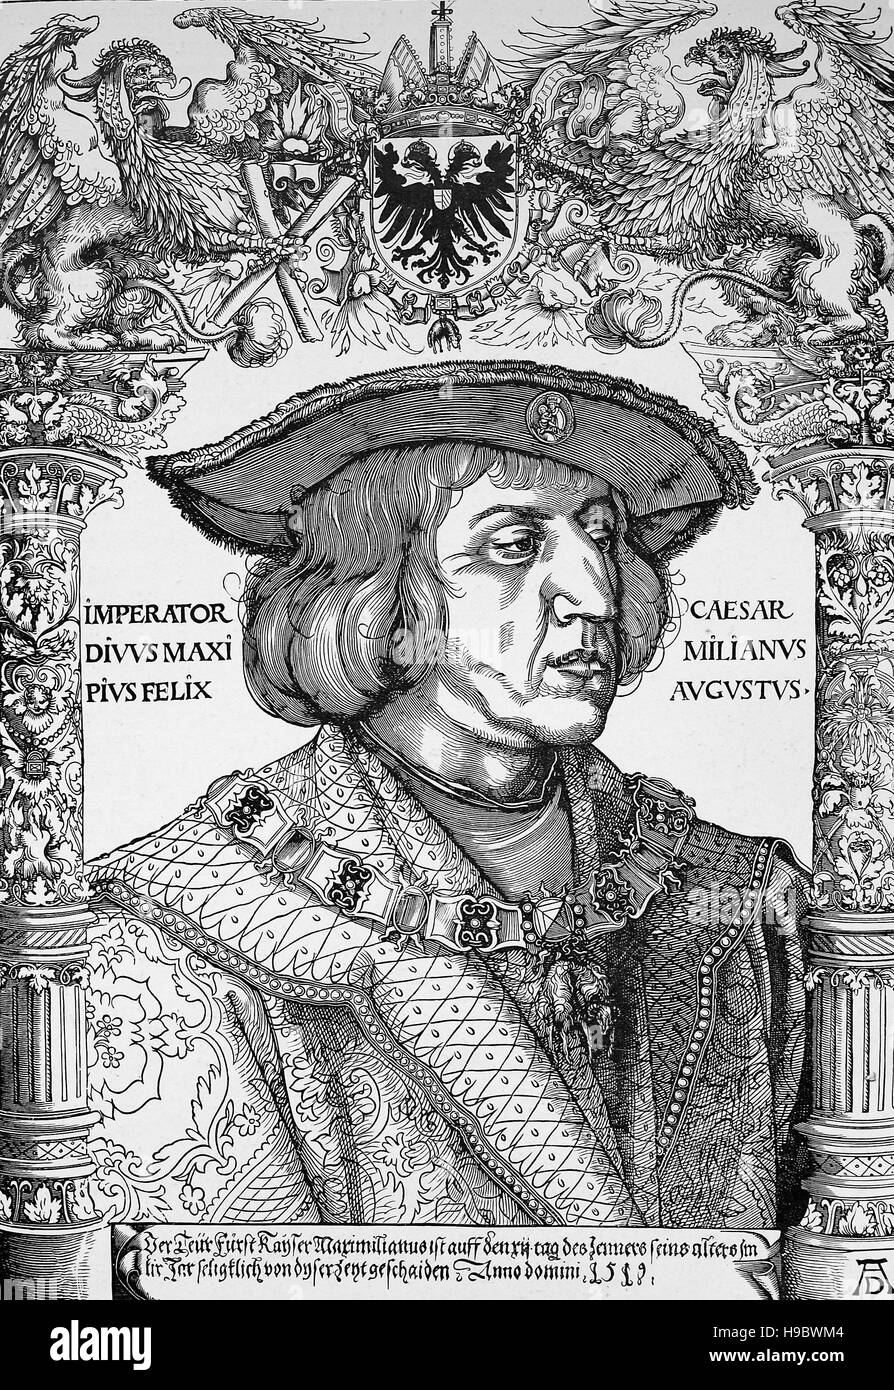 Maximilian I, 22 March 1459 - 12 January 1519, was King of the Romans also known as King of the Germans from 1486 and Holy Roman Emperor from 1493 until his death, historical illustration Stock Photo